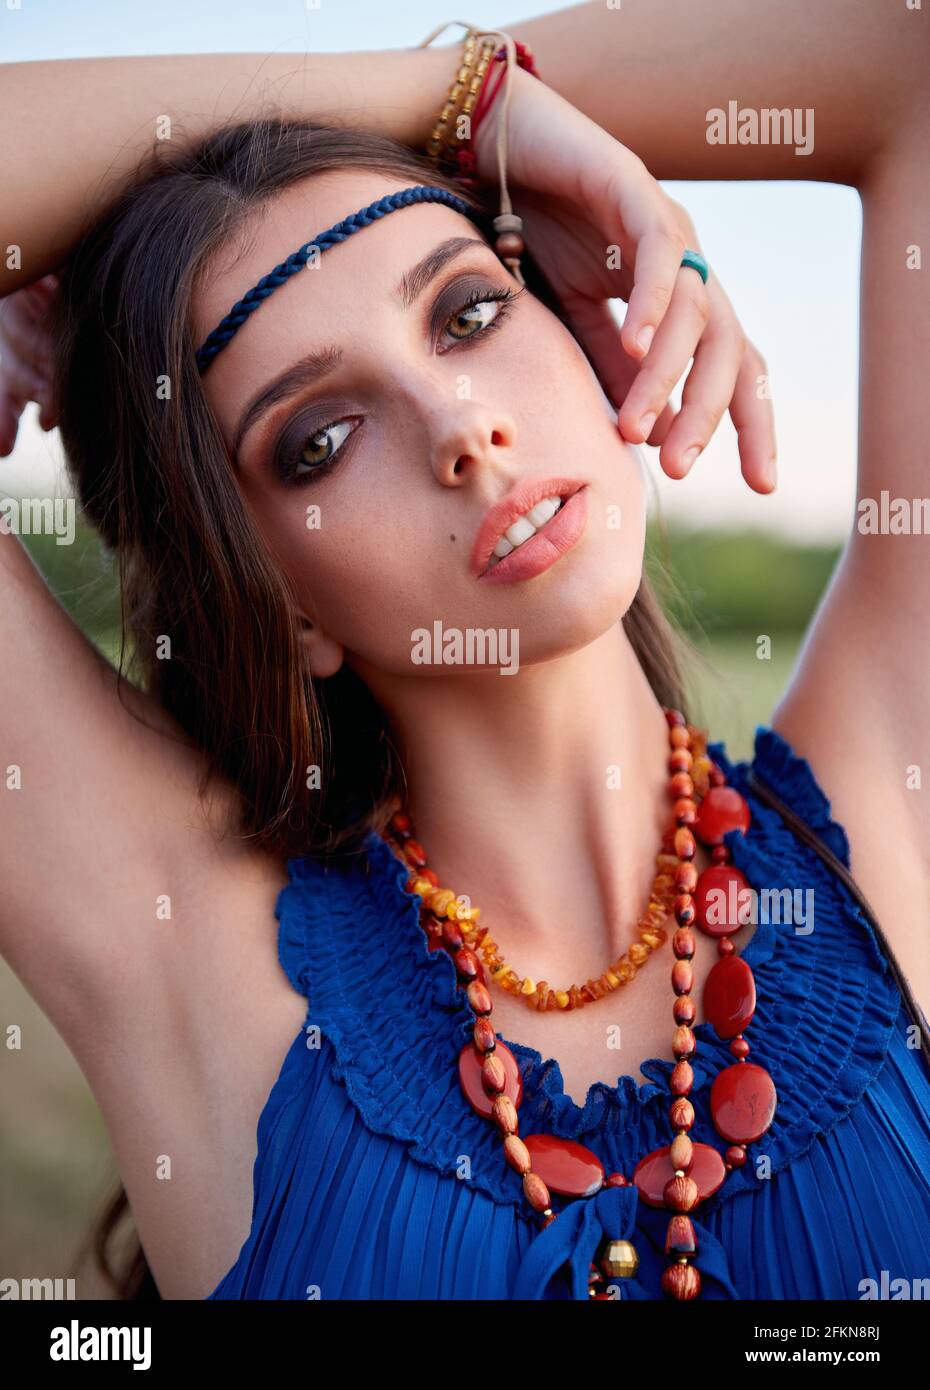 Close-up outdoor portrait of the beautiful young boho (hippie) girl Stock Photo